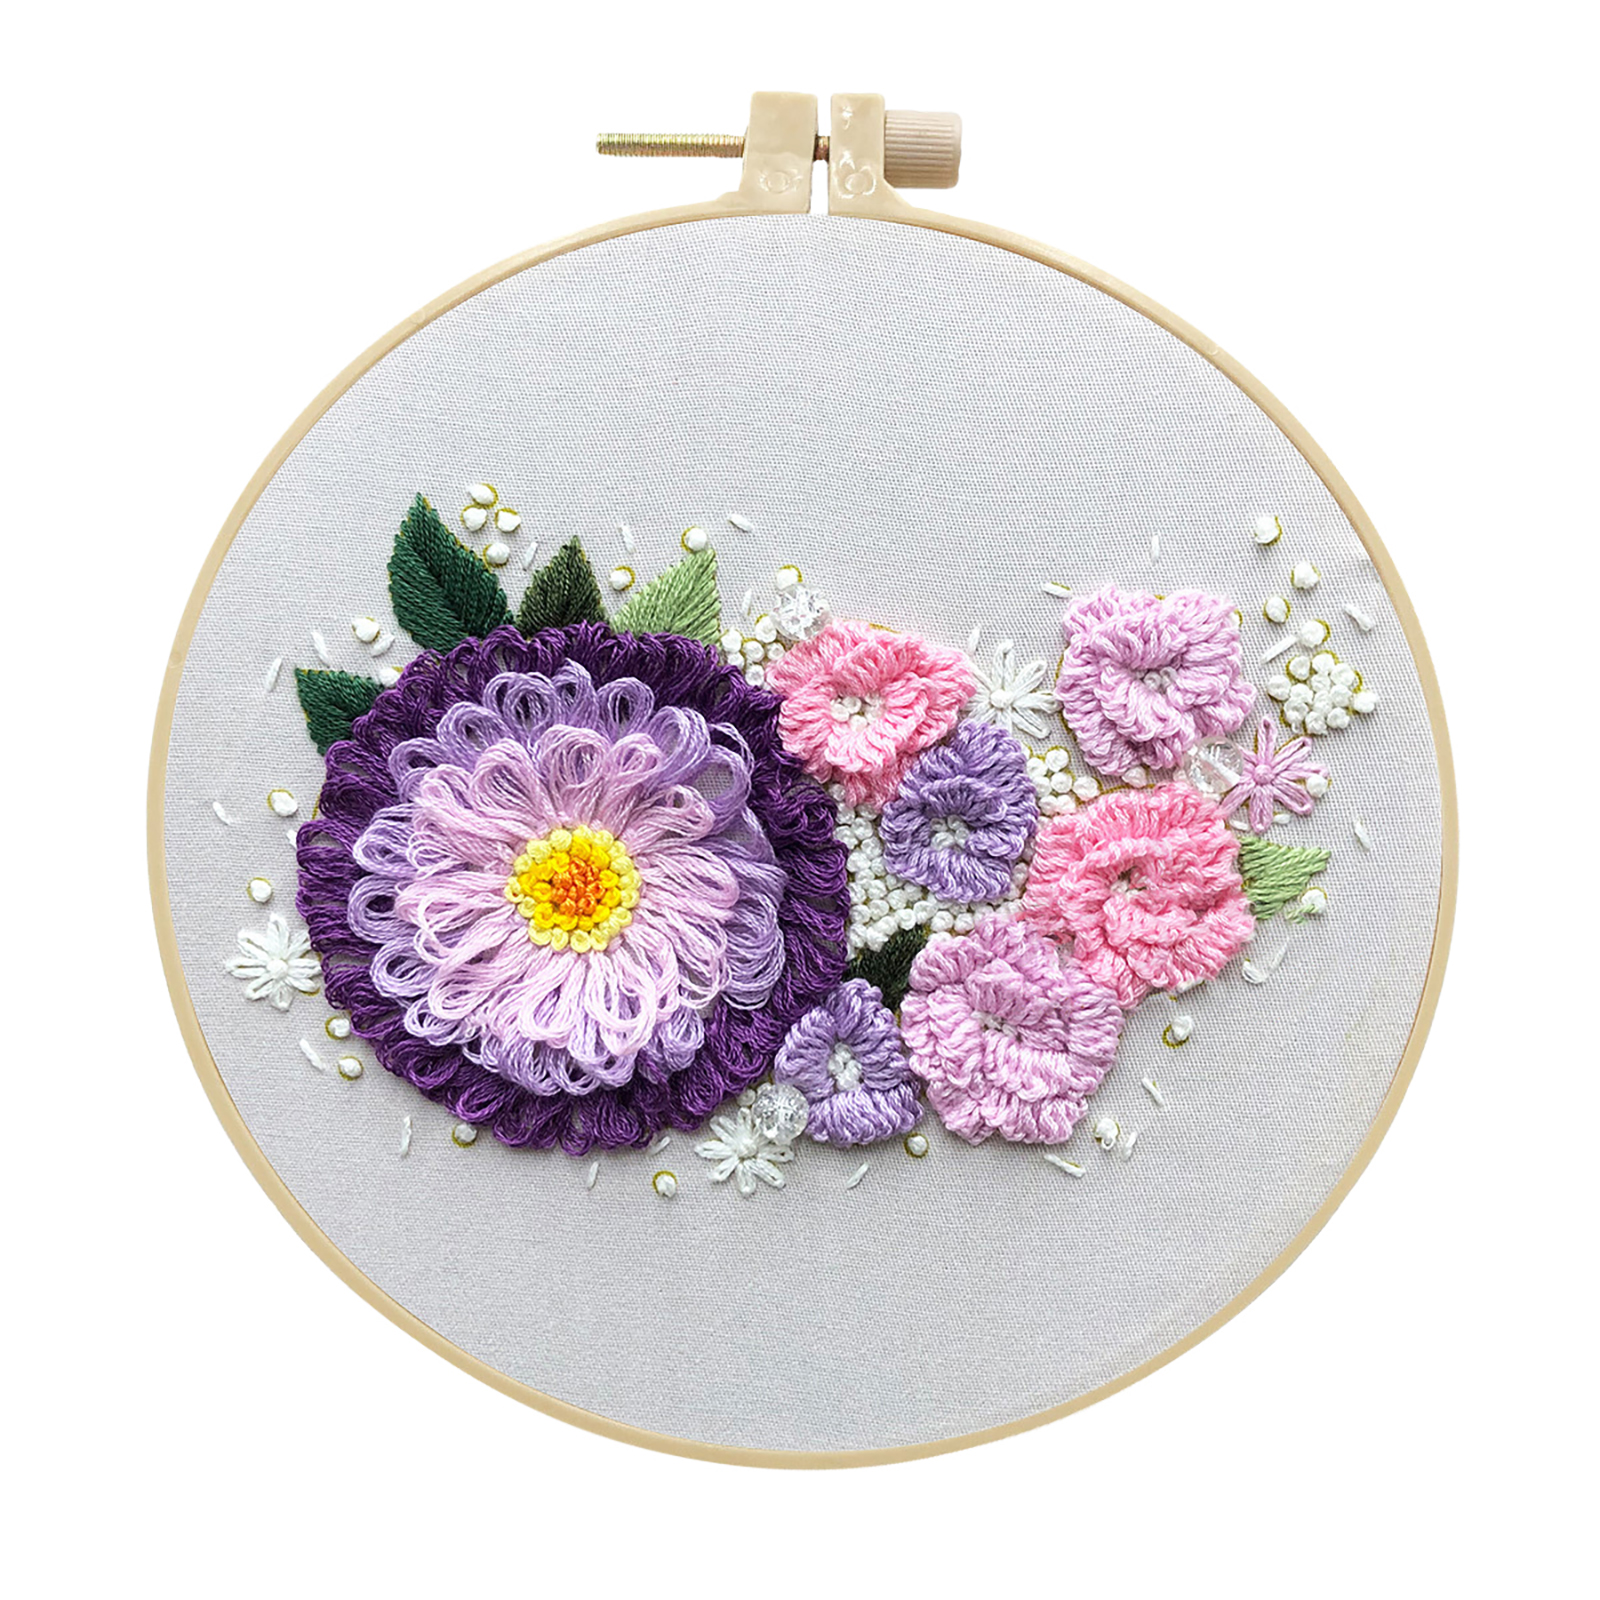 Embroidery Kits Cross stitch kits for Adult Beginner - Romantic flowers Pattern